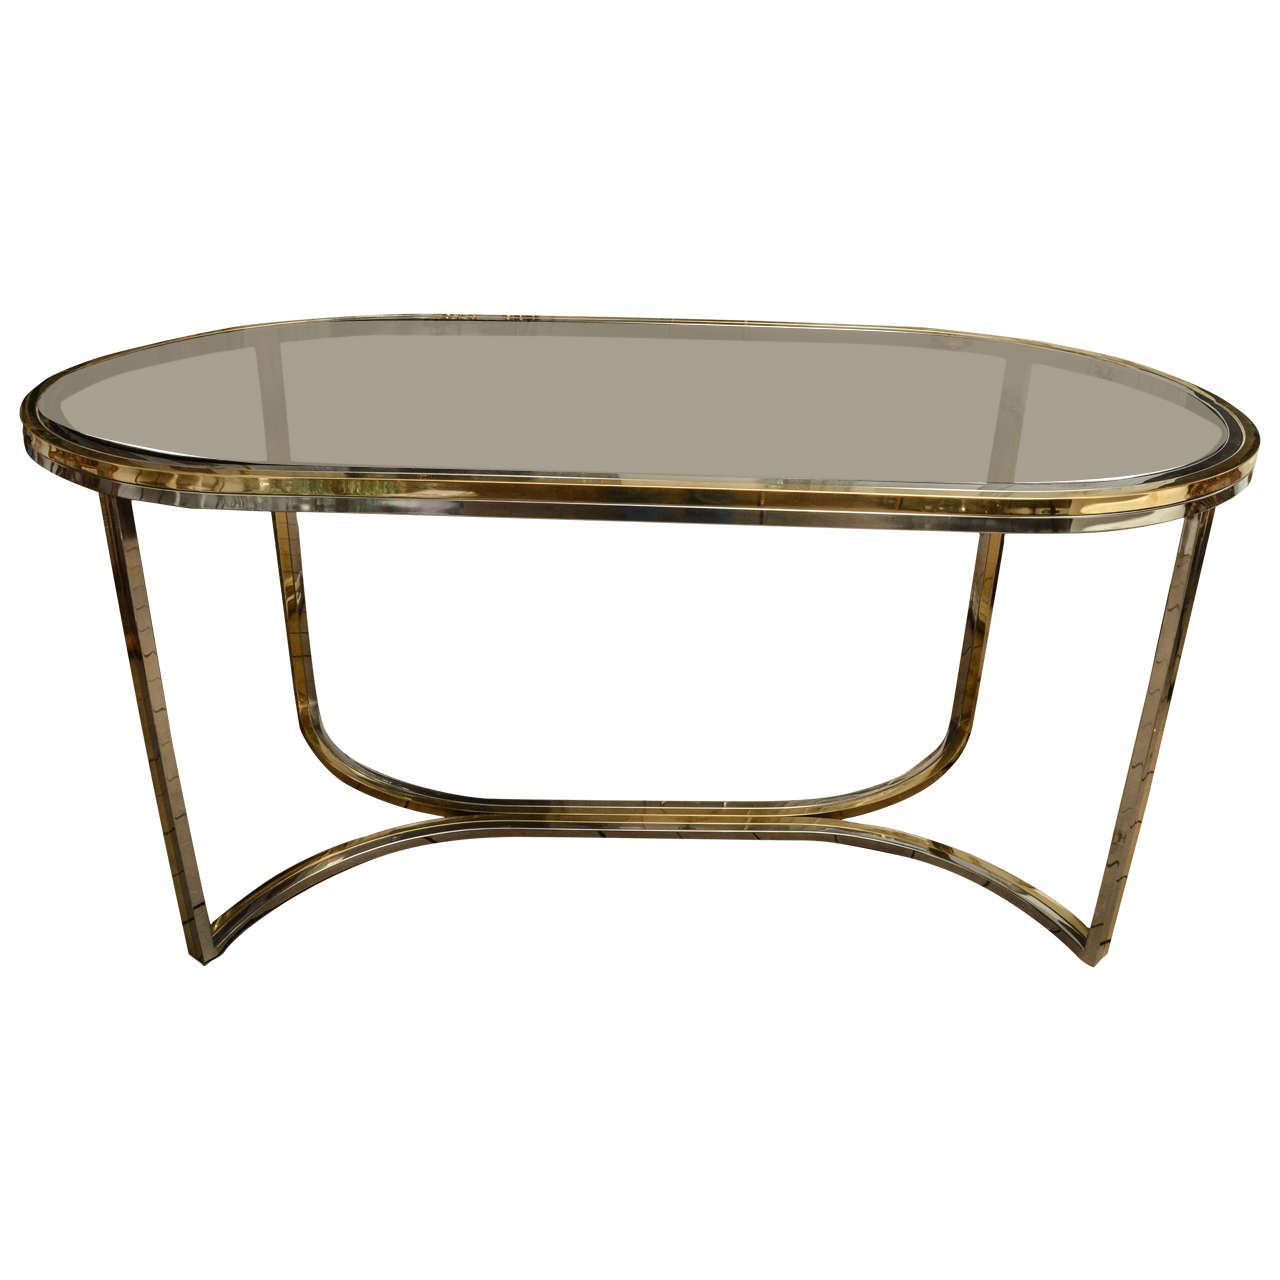 Chrome and Brass Oval Dining Table with Smoked Glass Top